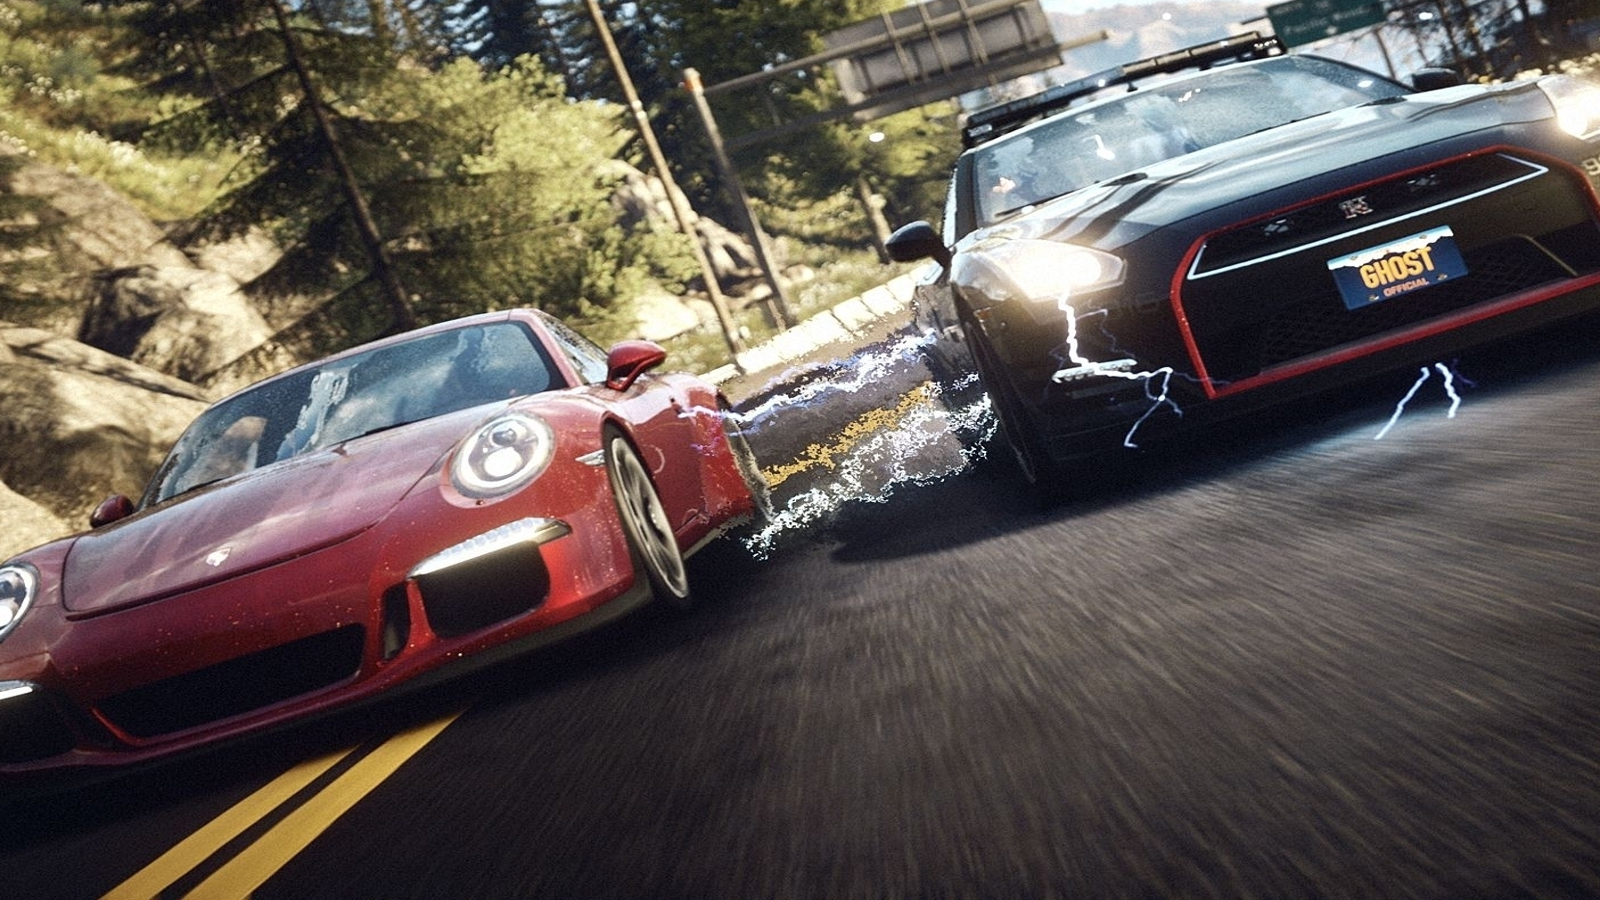 Need For Speed Rivals & NFS Heat Xbox One